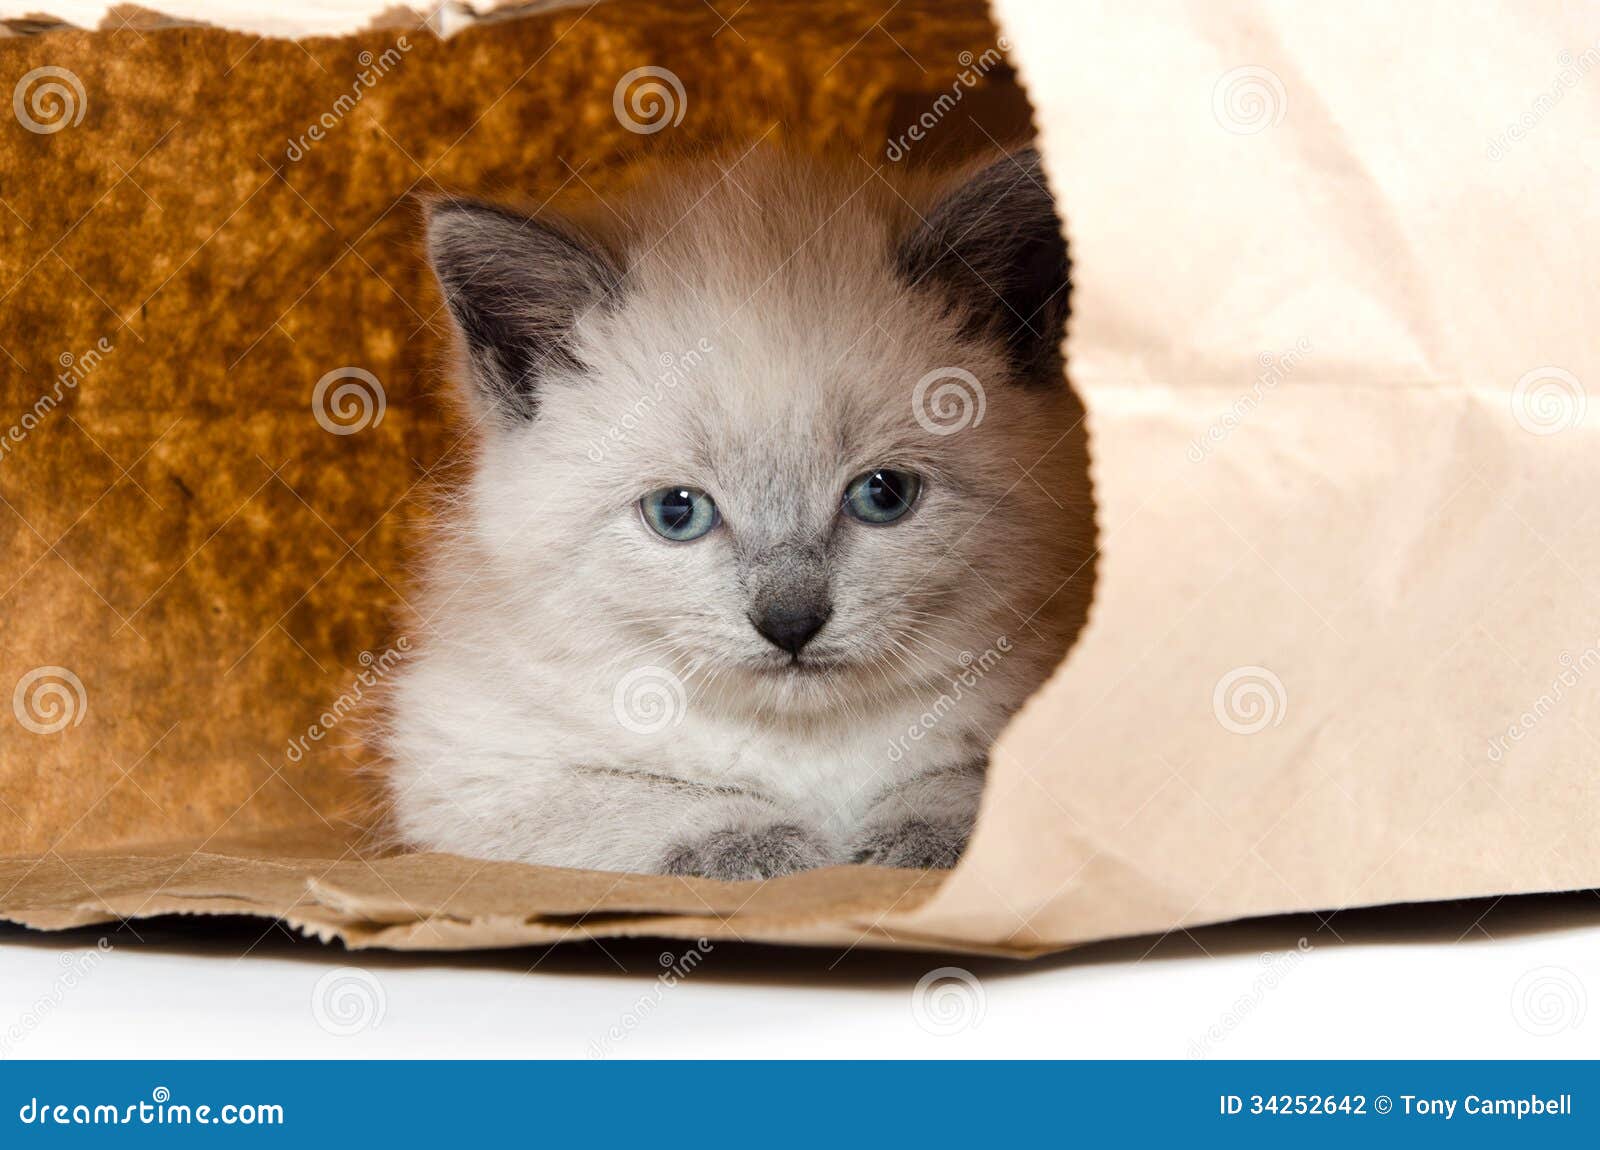 Cute Kitten In A Bag Stock Photo Image Of Sack Playing 34252642